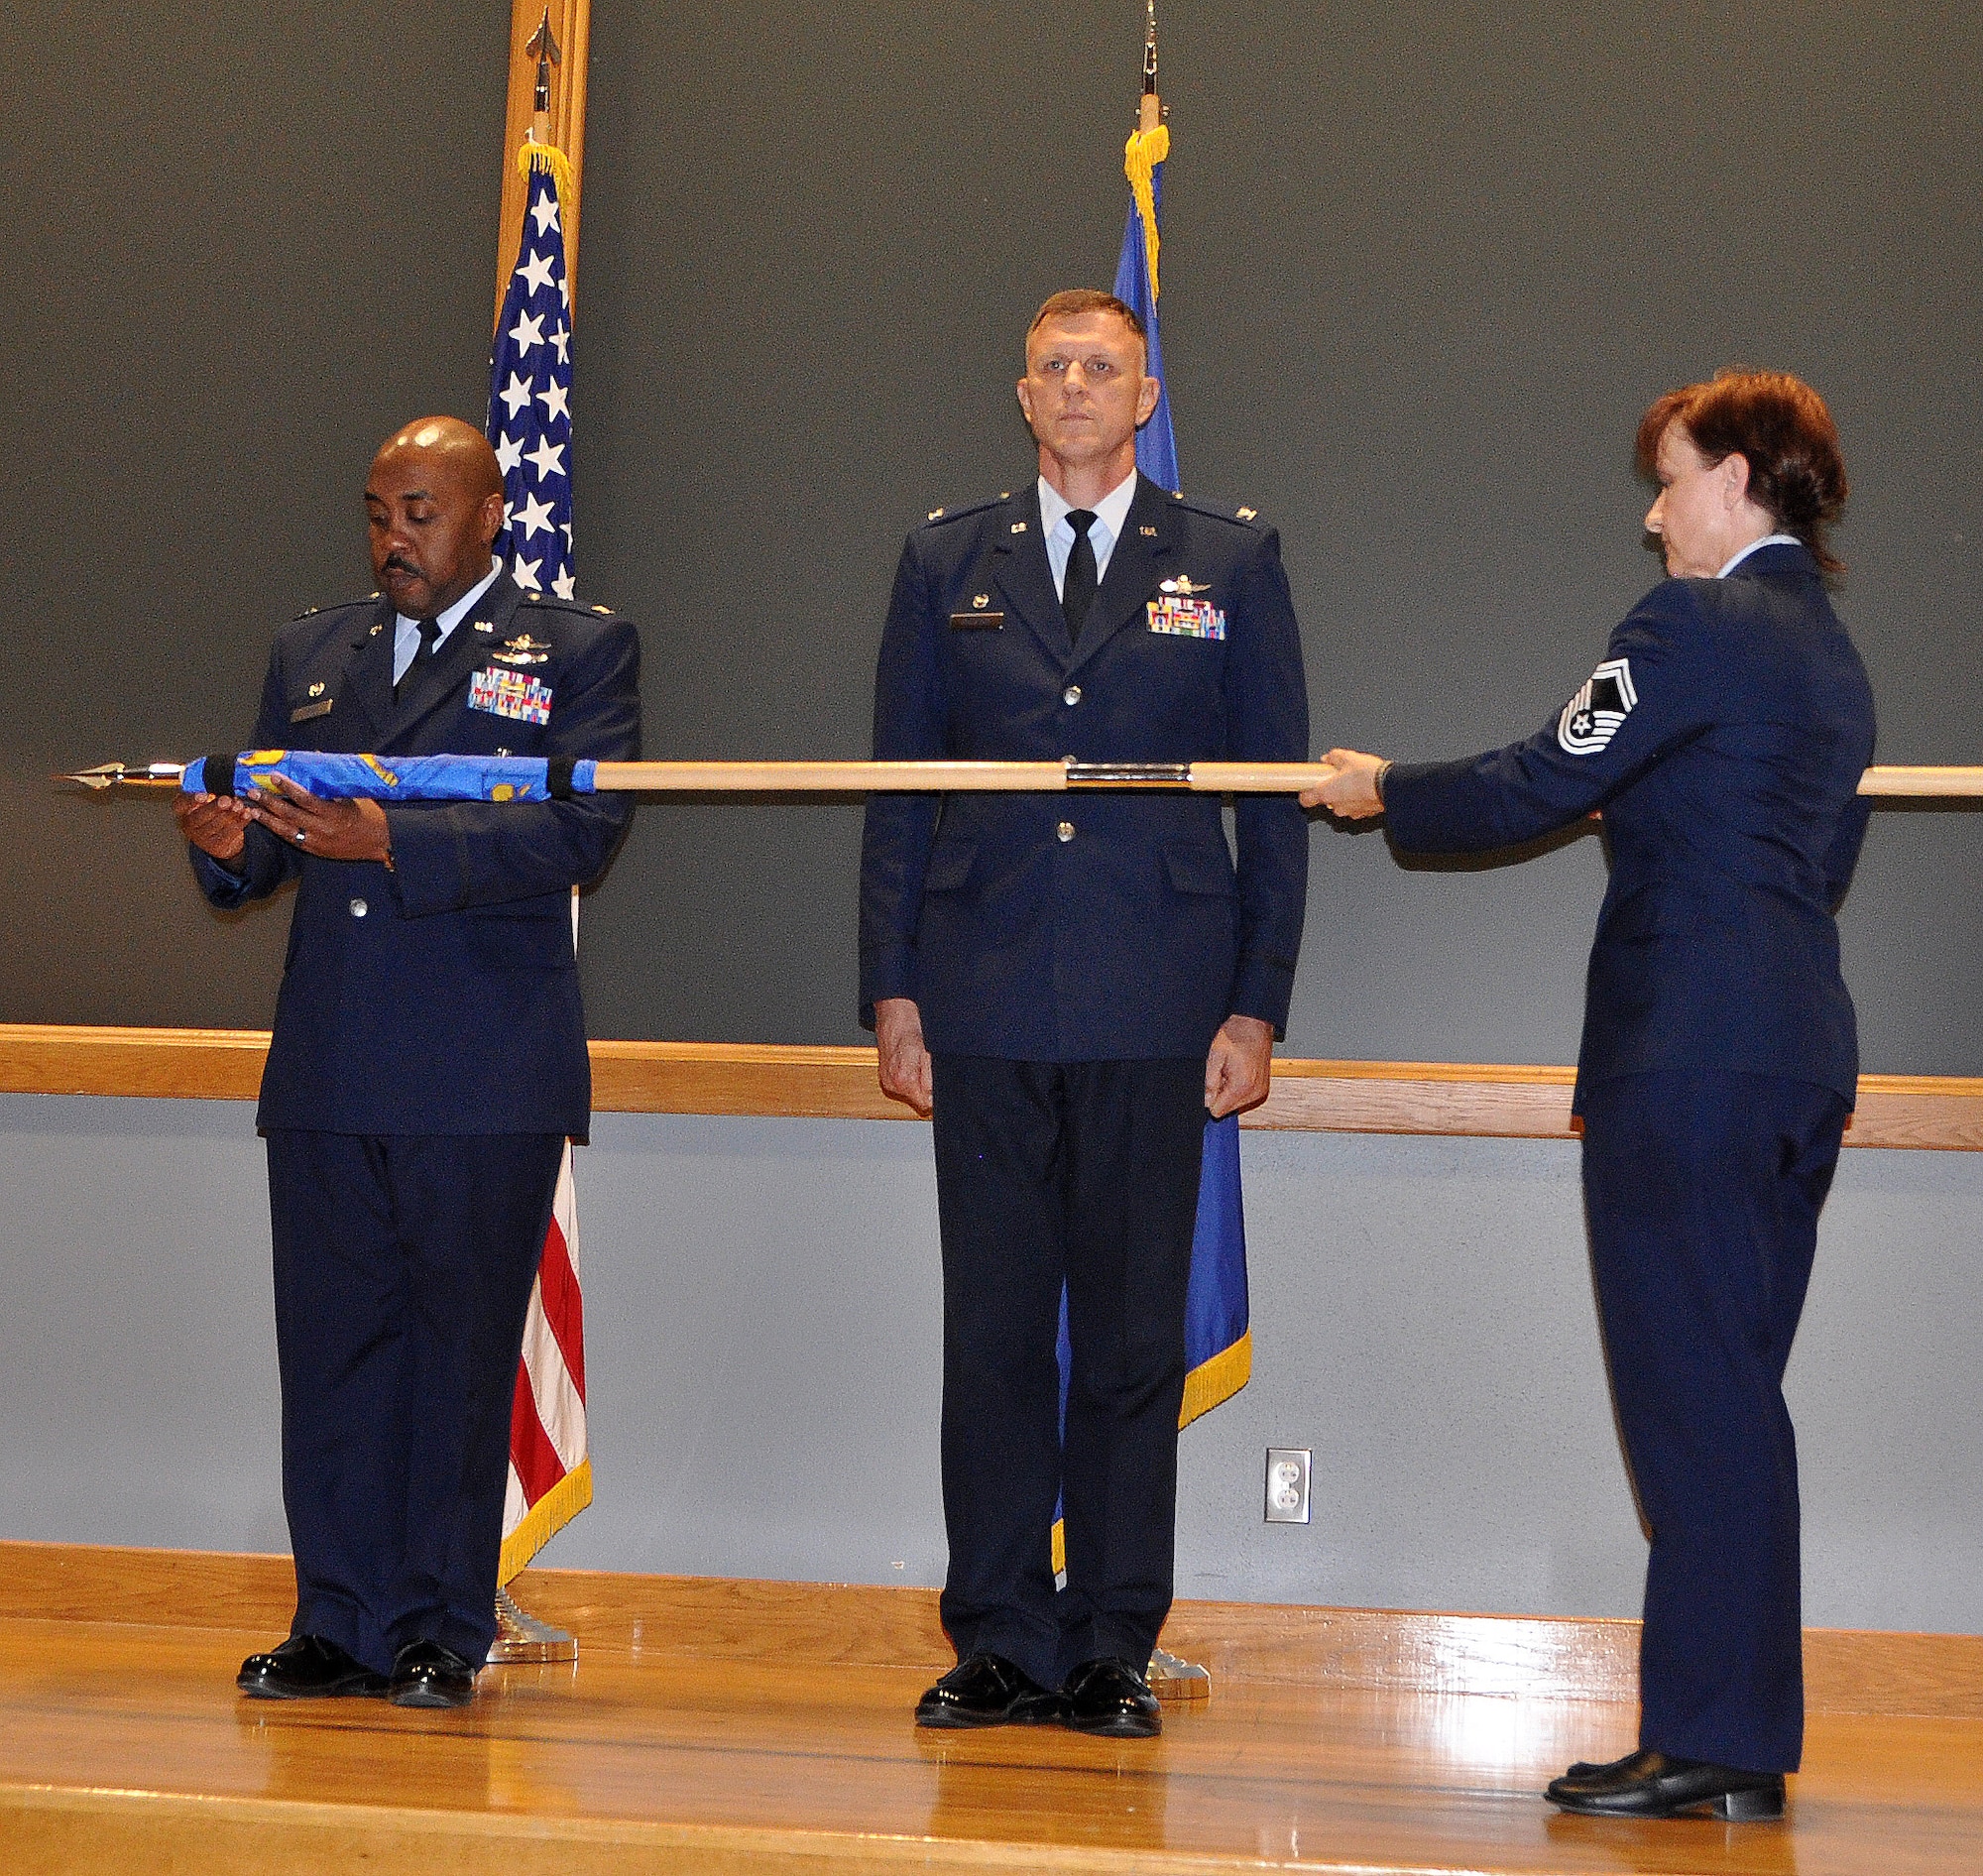 Col. Lloyd Terry Jr., 960th Cyberspace Operations Group commander prepares to unfurl the 854th Combat Operations Squadron’s guidon held by Senior Master Sgt. Kim MacFarlane, 854th COS superintendent at the squadrons activation ceremony April 5 at the Kelly Fitness Center auditorium, Joint Base San Antonio-Lackland, Texas.  Col. Mark Melcher (center), 854th COS commander, assumed command of the former detachment a year ago to build the unit to squadron strength and is continuing his focus on hiring qualified people to support the Air Force cyberspace command and control mission. (U.S. Air Force photo/1st Lt. Lori Fiorello)